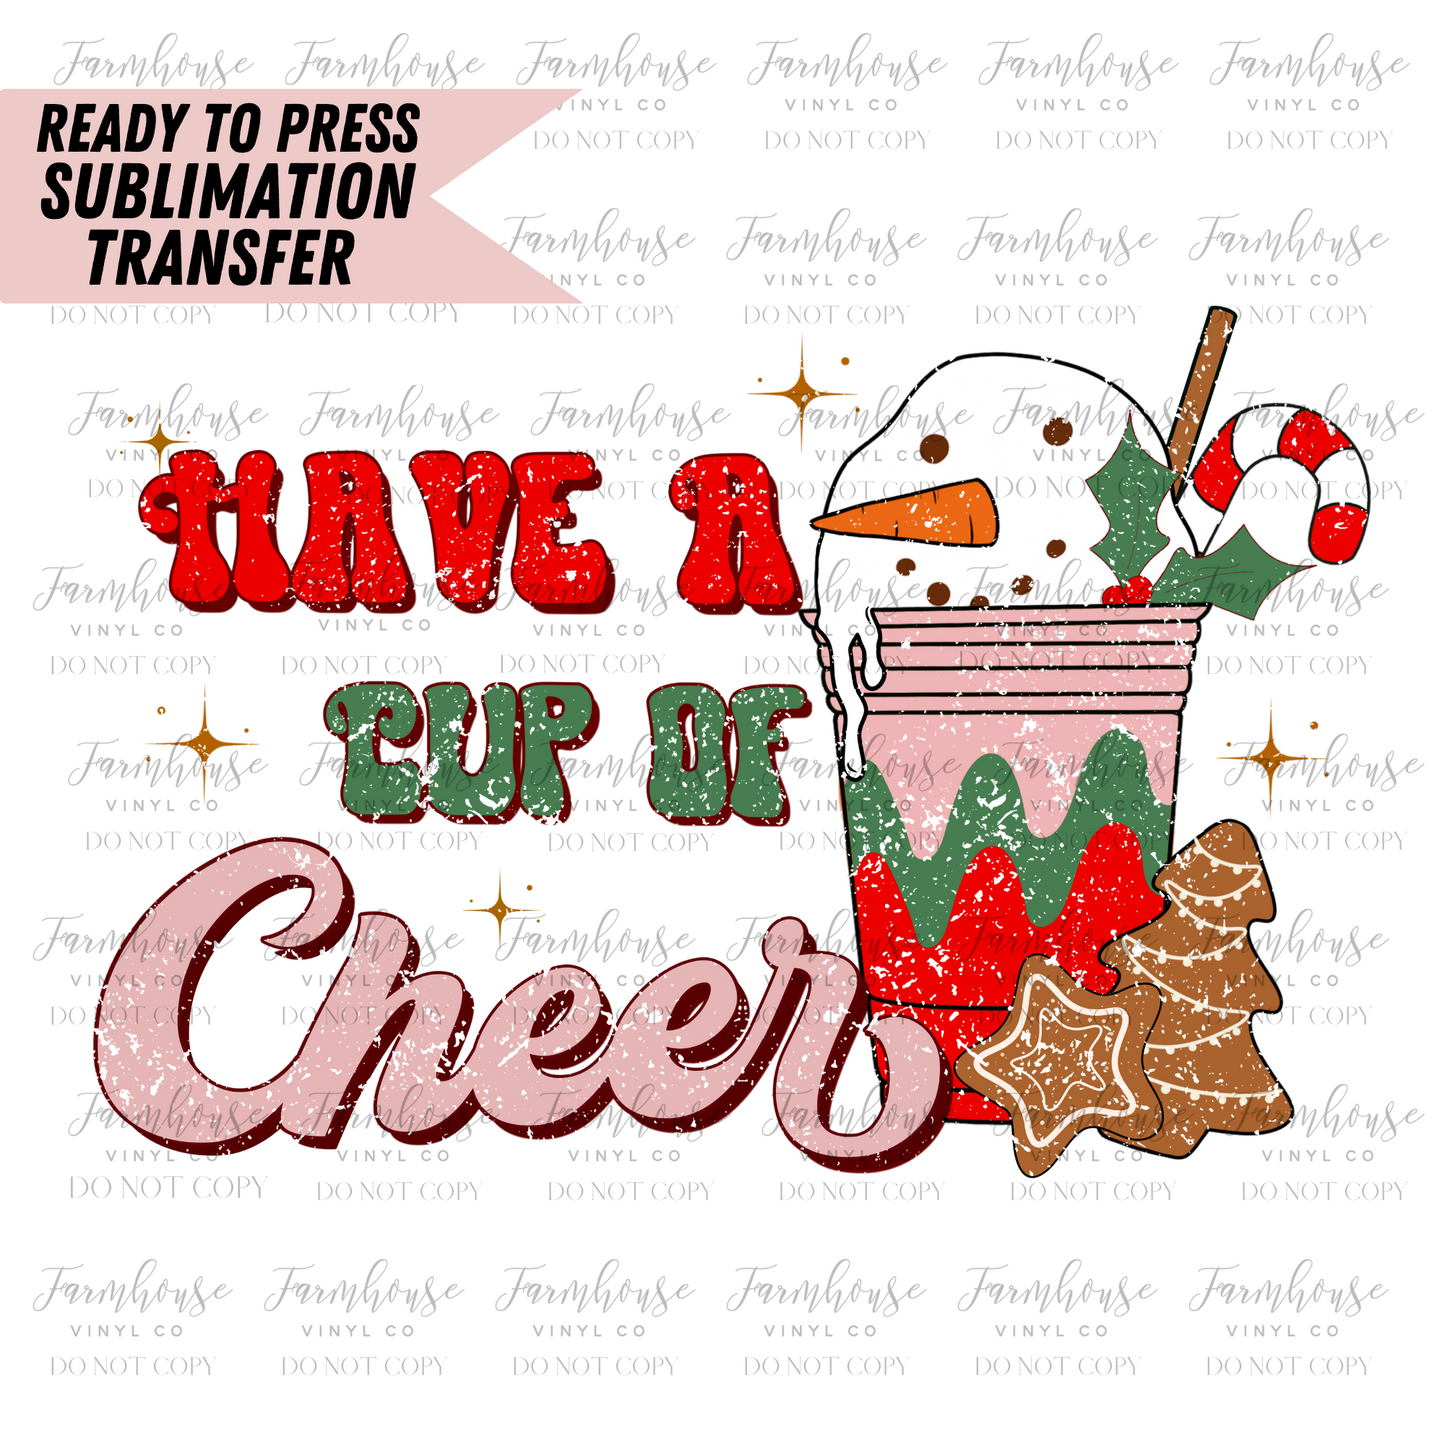 Have A Cup of Cheer Ready to Press Sublimation Transfer - Farmhouse Vinyl Co